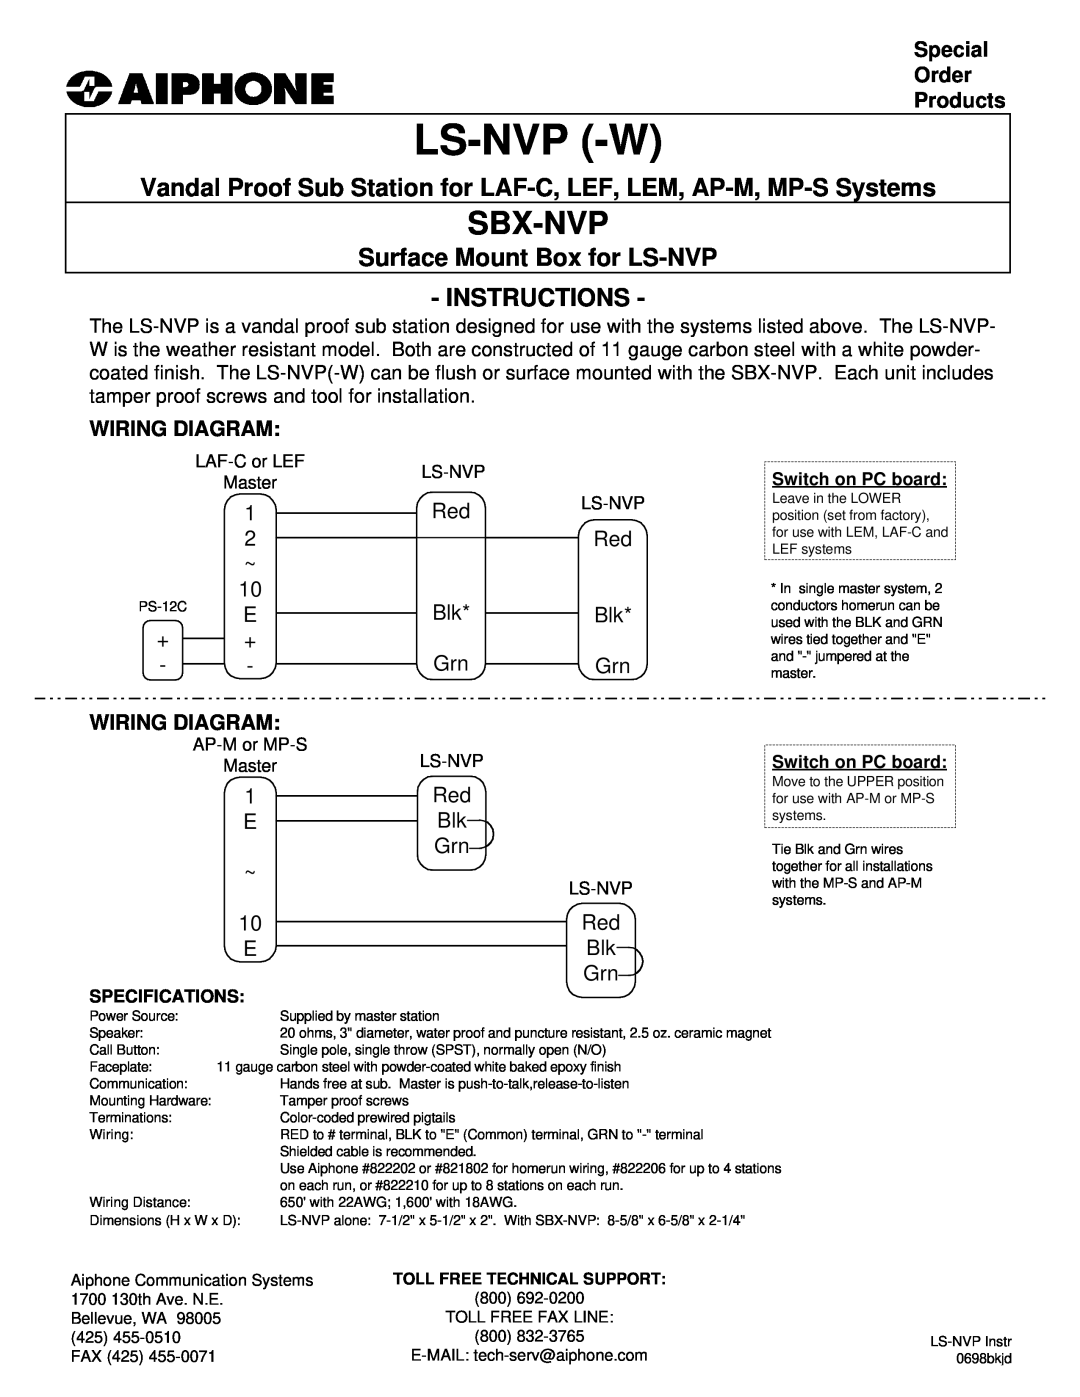 Aiphone LEM, LEF instruction manual Paging Adaptor Use with, Instructions, Wiring Diagram, BA-1, 5Yel, Specifications 